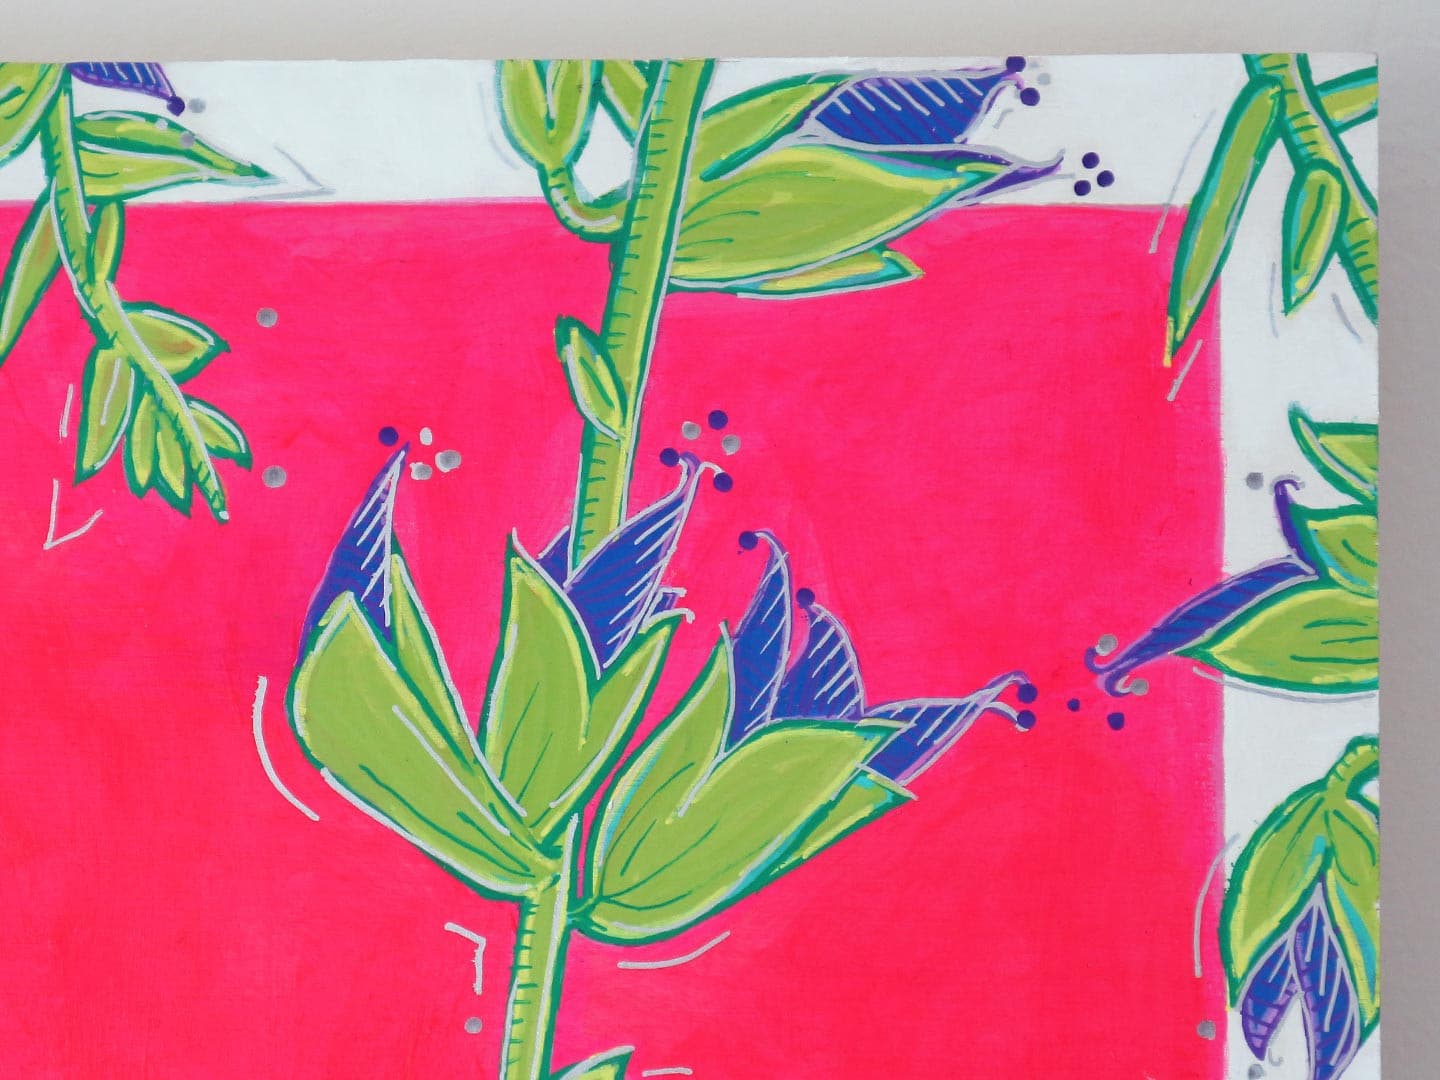 Corner of "Sweet sage": A bold botanical painting featuring sage with purple flowers set against a vibrant neon pink background 